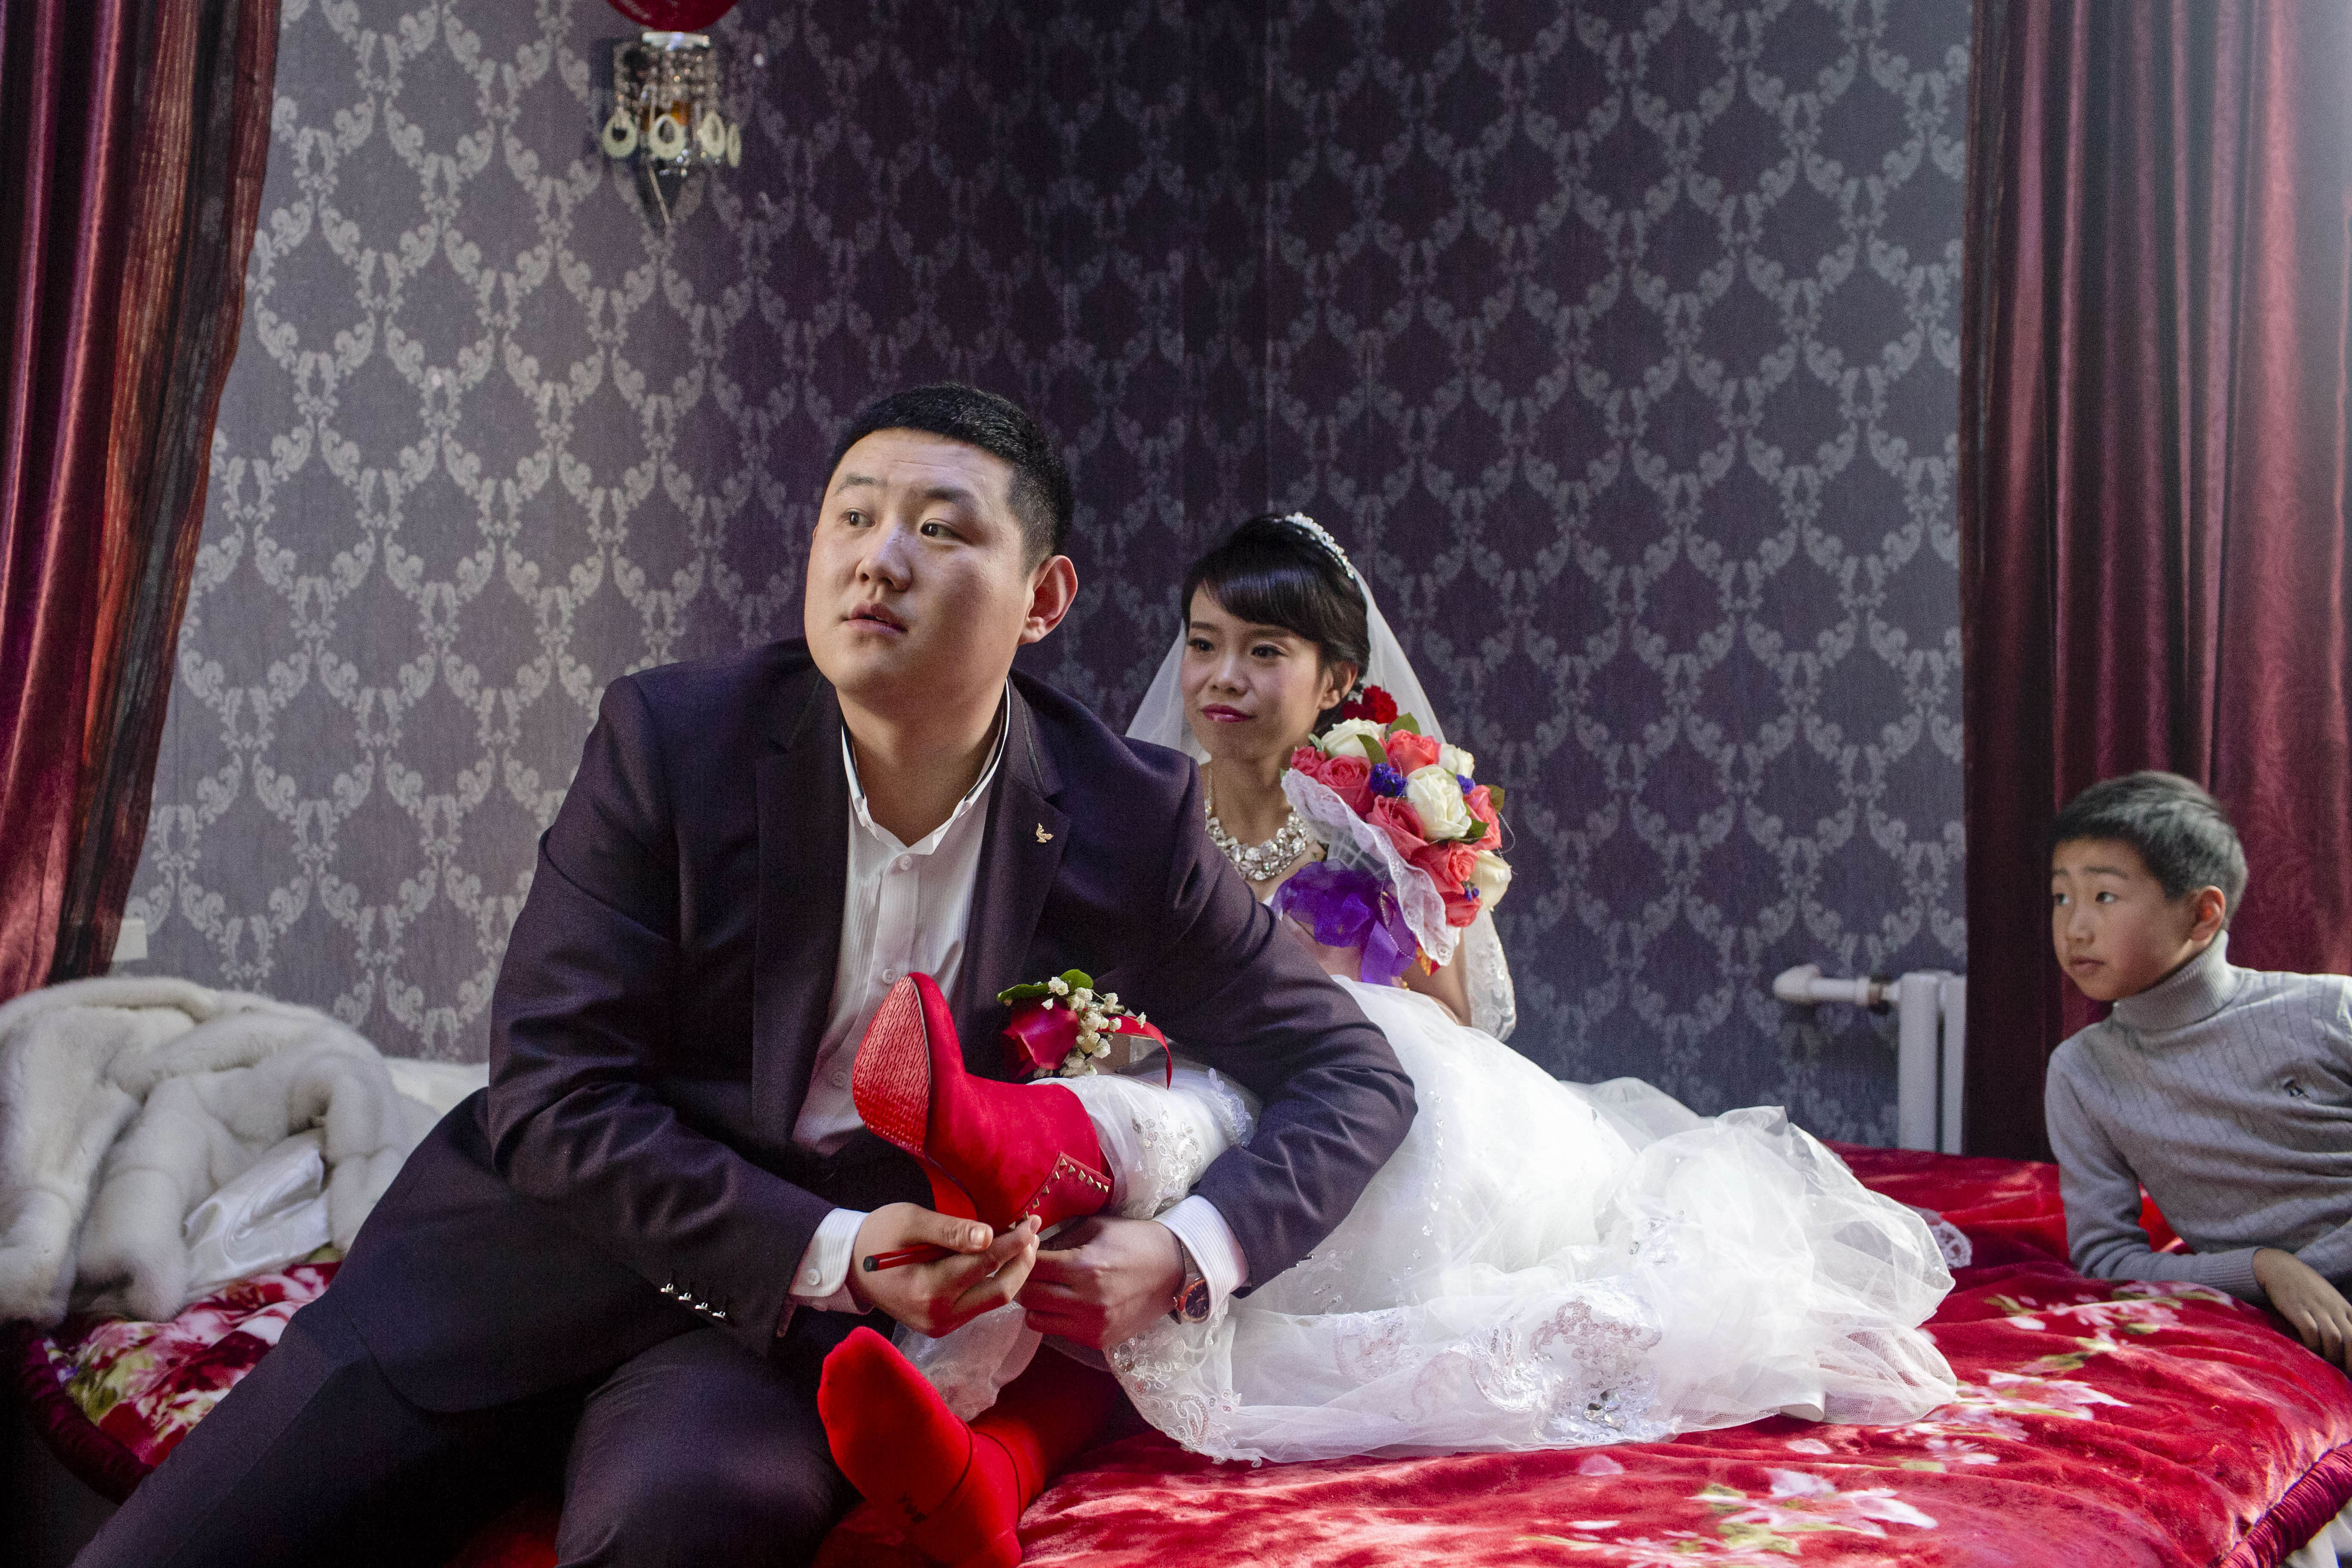 Following the local tradition, Zhang Tianqi helps his wife-to-be put on red high heels before their wedding, Shuangyashan, Jan. 27, 2016. The couple married despite growing insecurity surrounding Zhang’s job. Zhou Pinglang/Sixth Tone